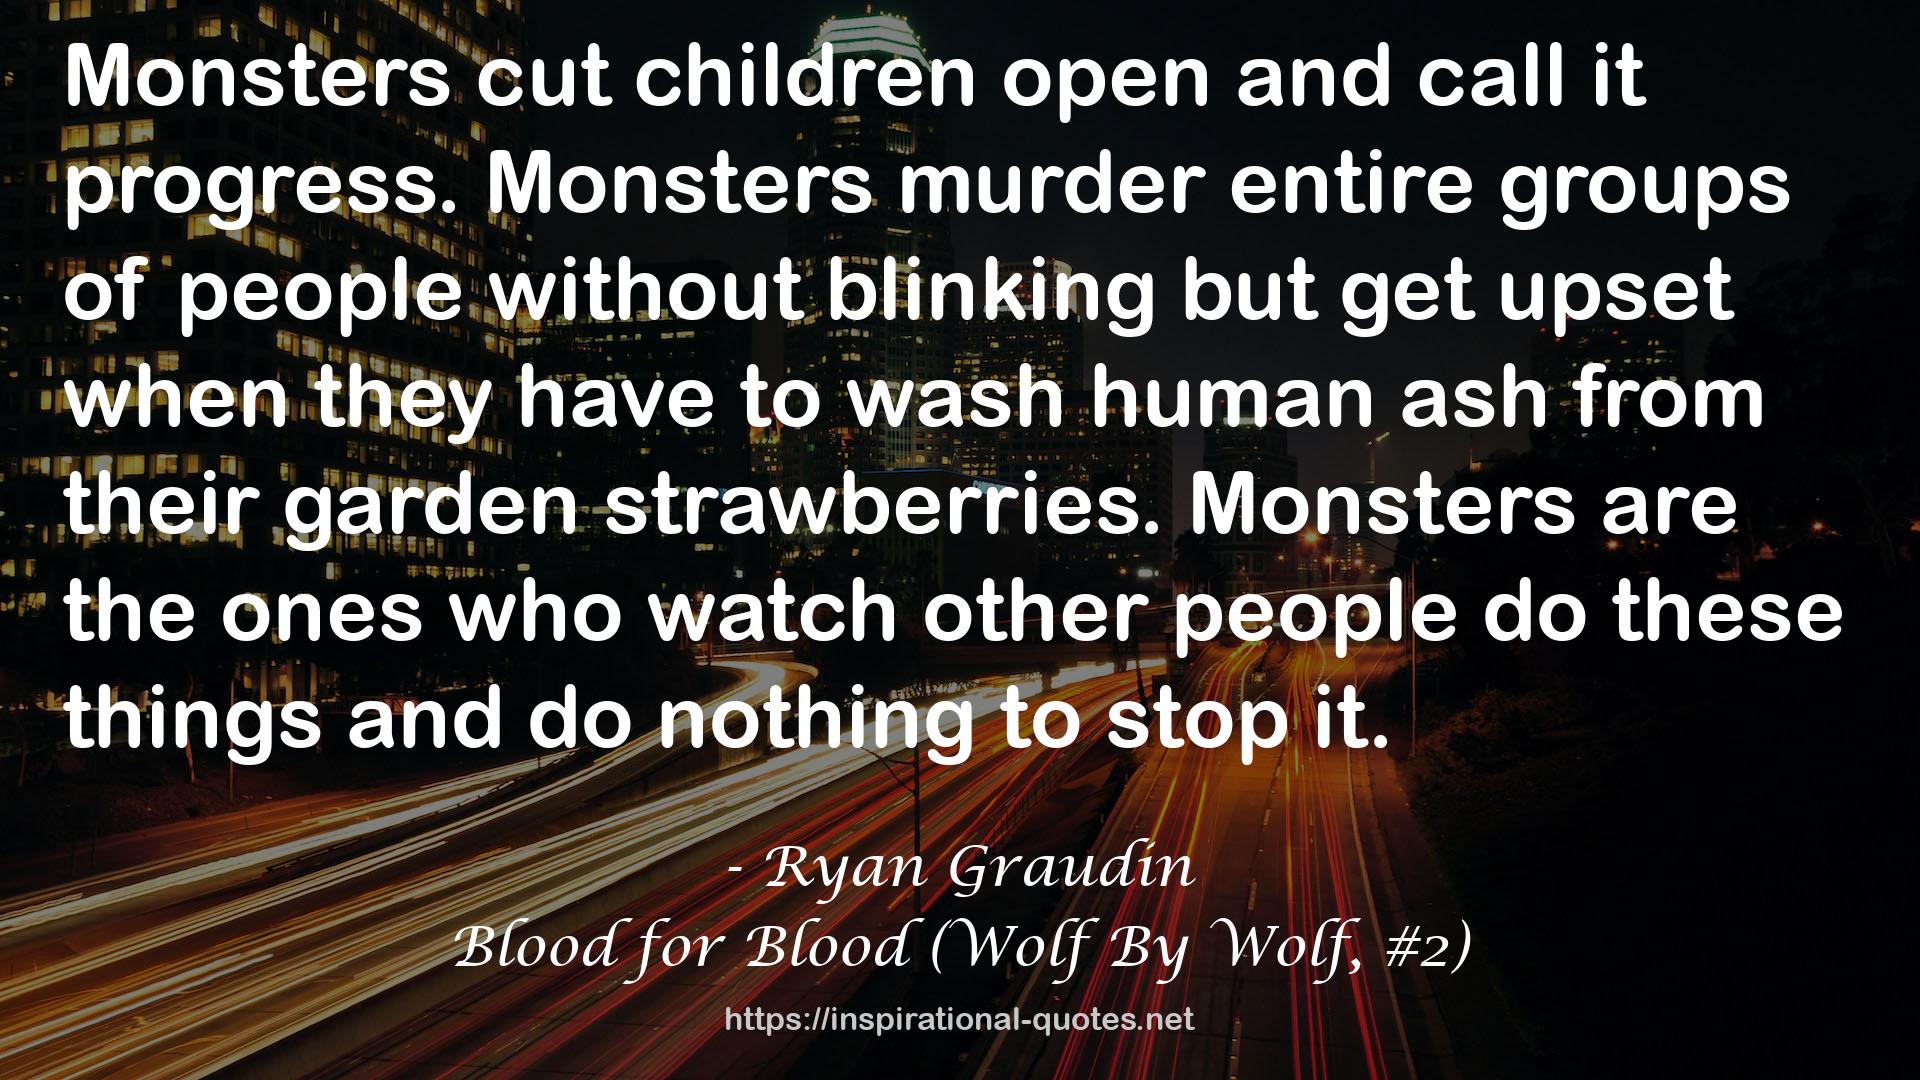 Blood for Blood (Wolf By Wolf, #2) QUOTES